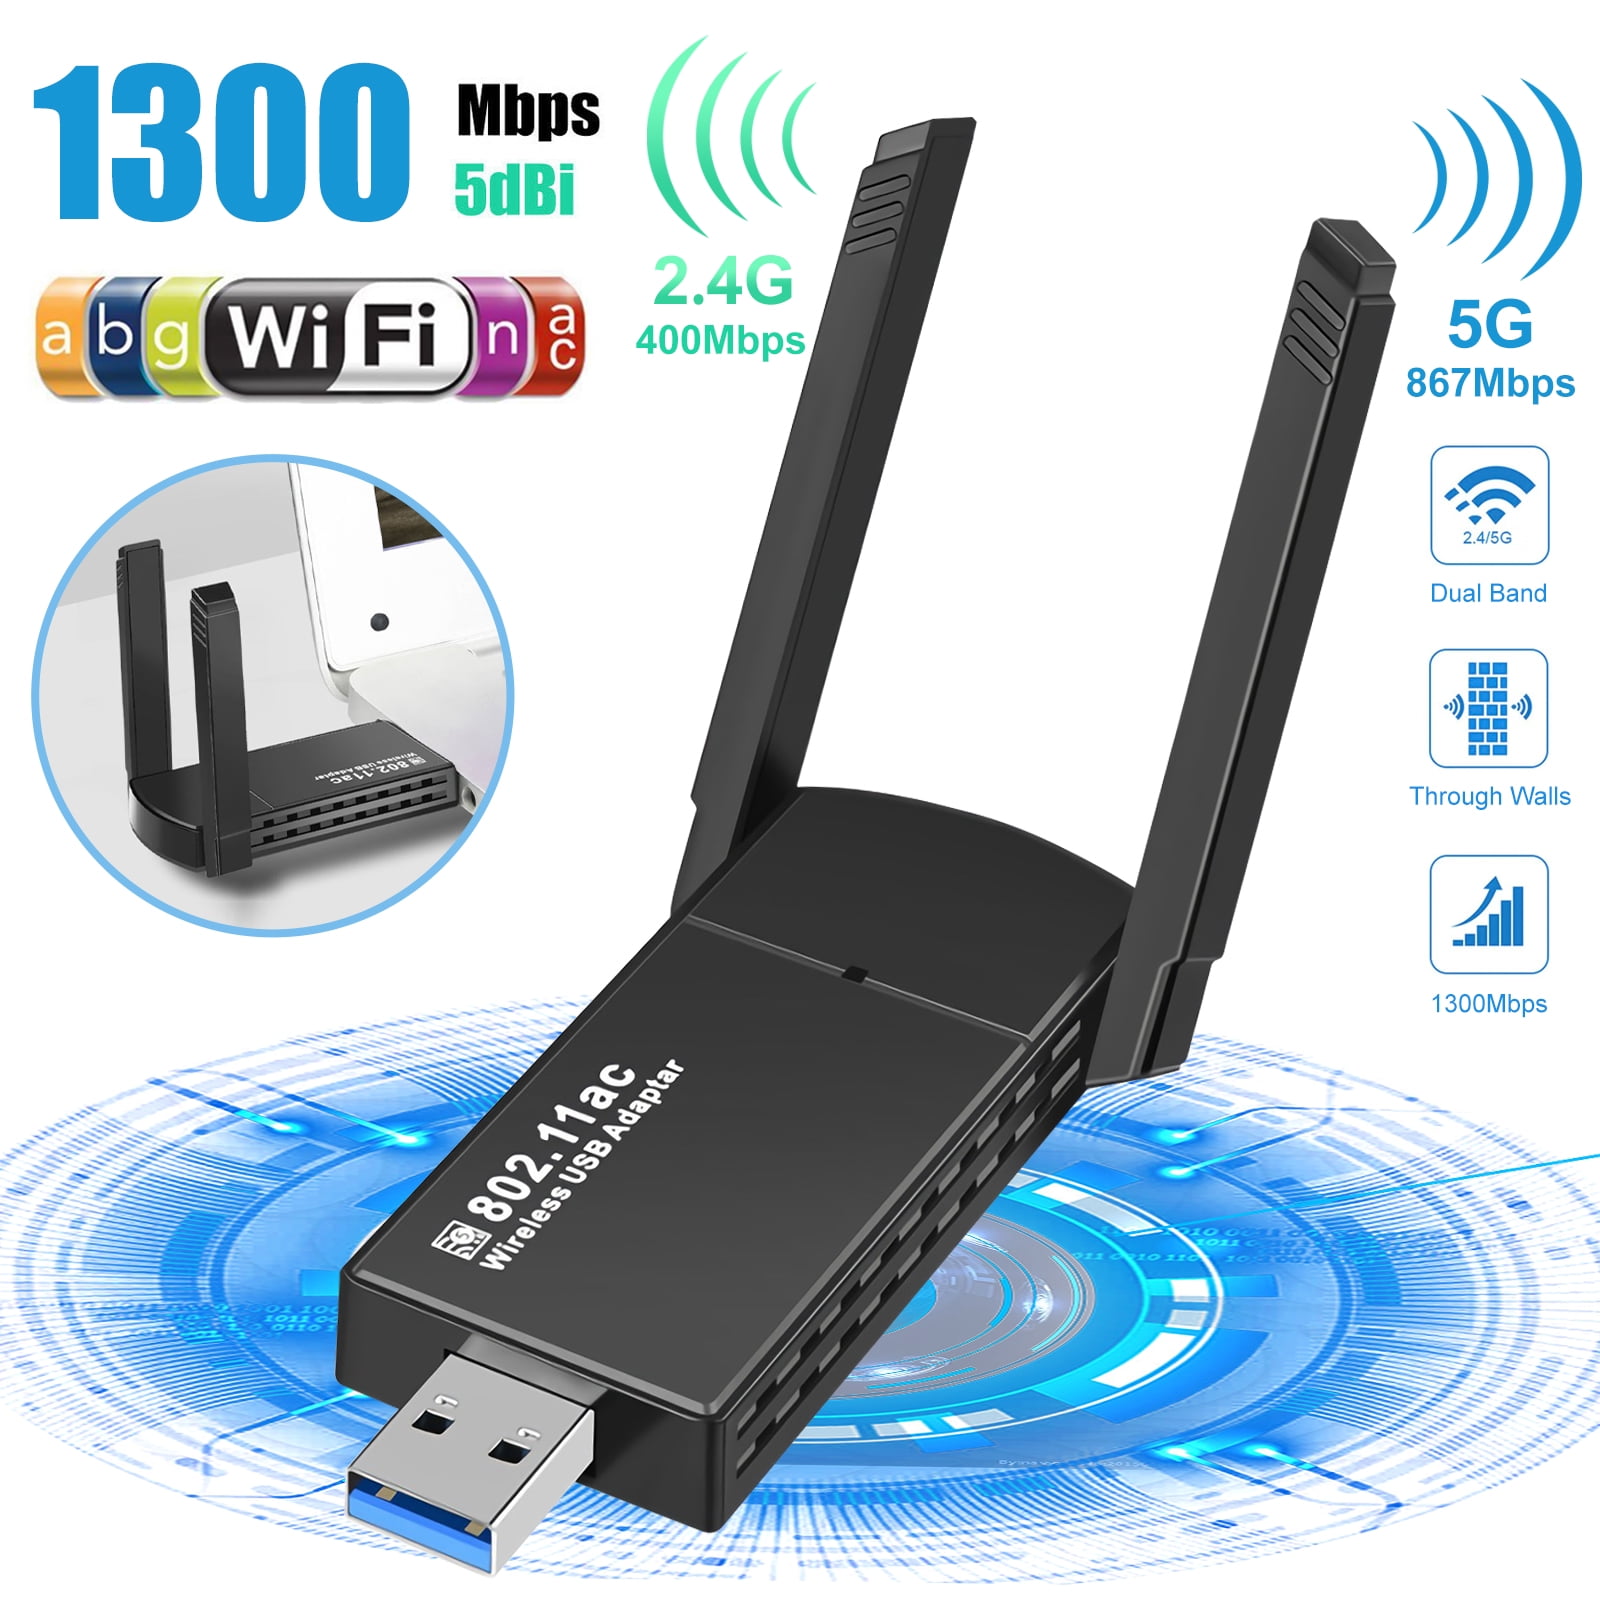 1300Mbps, 1300Mbps Black Wireless USB WiFi Adapter 1200Mbps Dual Band 2.4GHz/300Mbps 5GHz/867Mbps High Gain Dual 5dBi Antennas Network WiFi USB 3.0 for Desktop Laptop Stick 